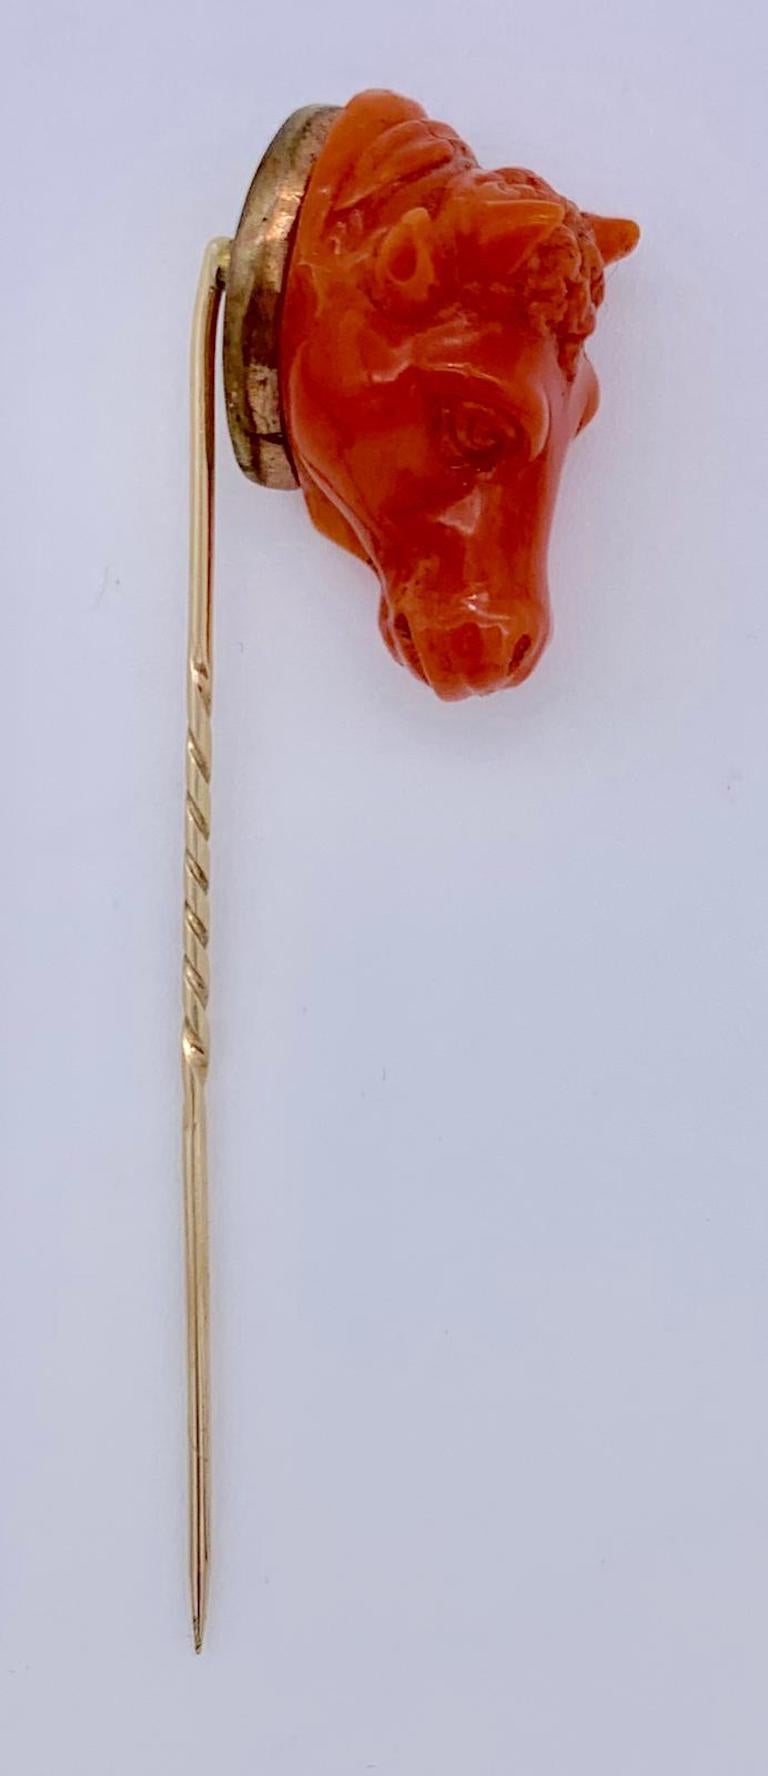 The coral has been finely carved in the shape of a bull´s head. The taurus is mounted on metal backing. The pin is made out of 9 k gold. The carving dates from around 1840.